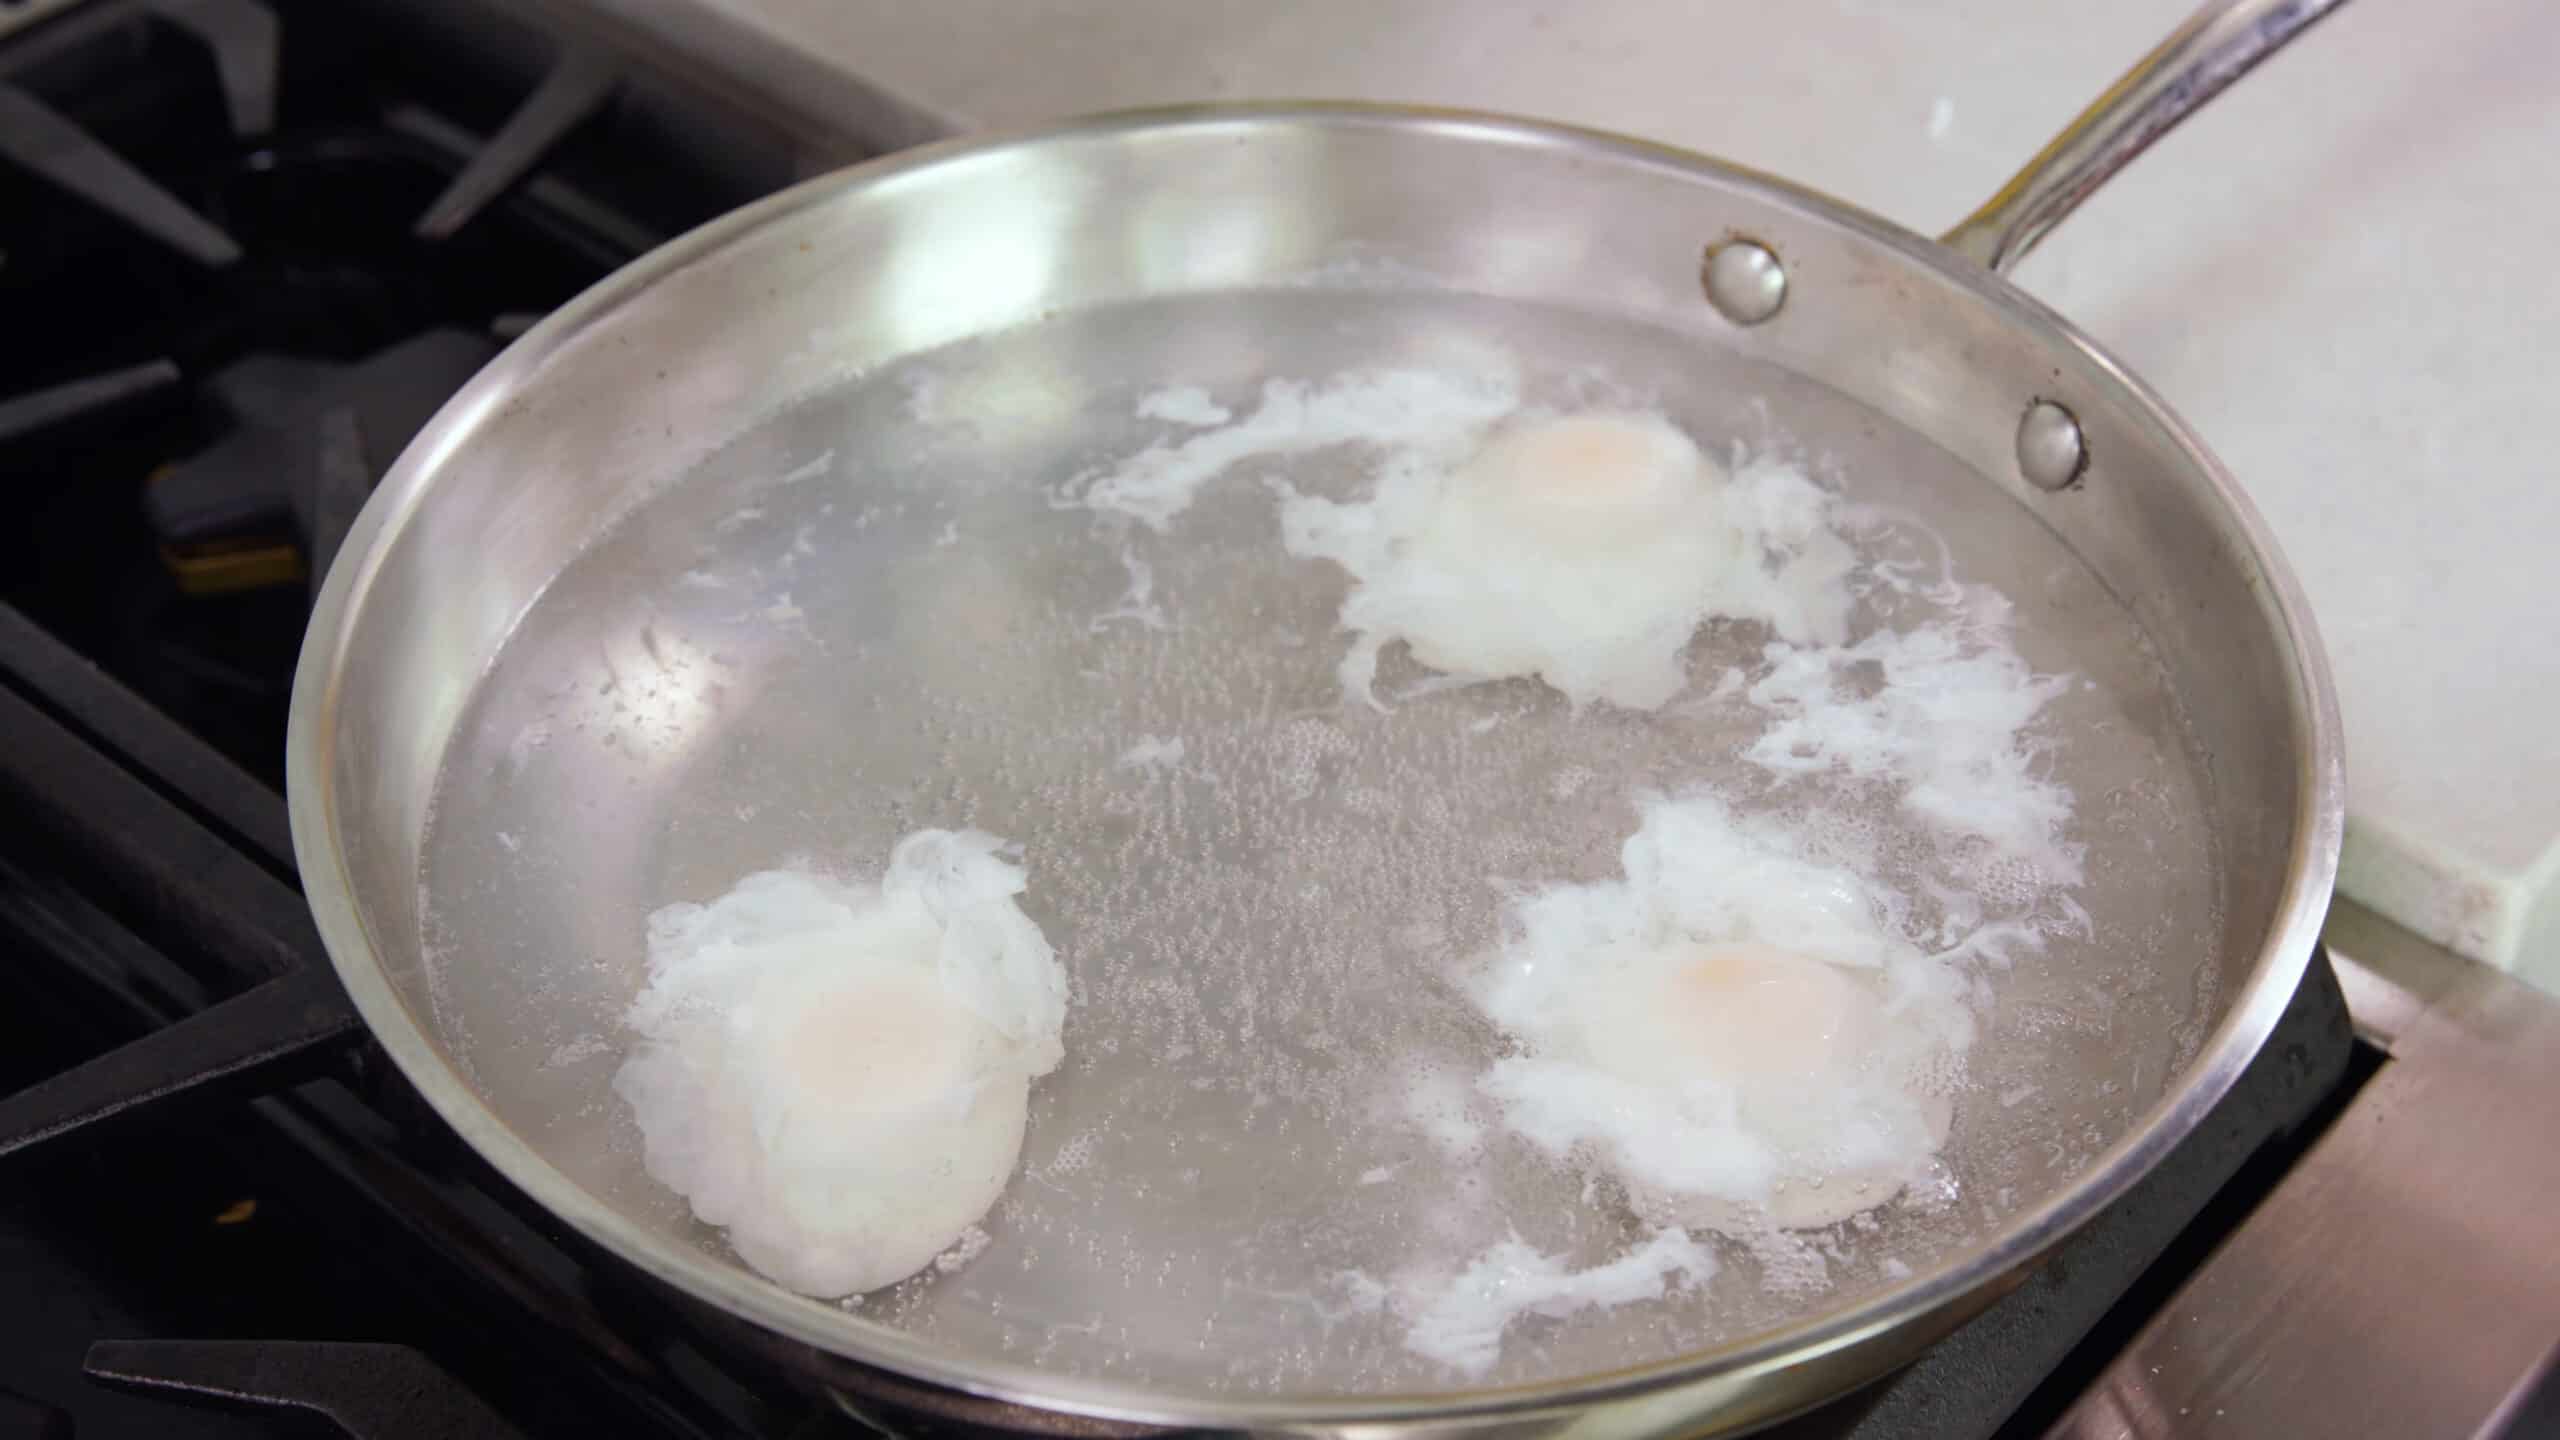 Angled view of silver saucepan with three poached eggs inside on stovetop.